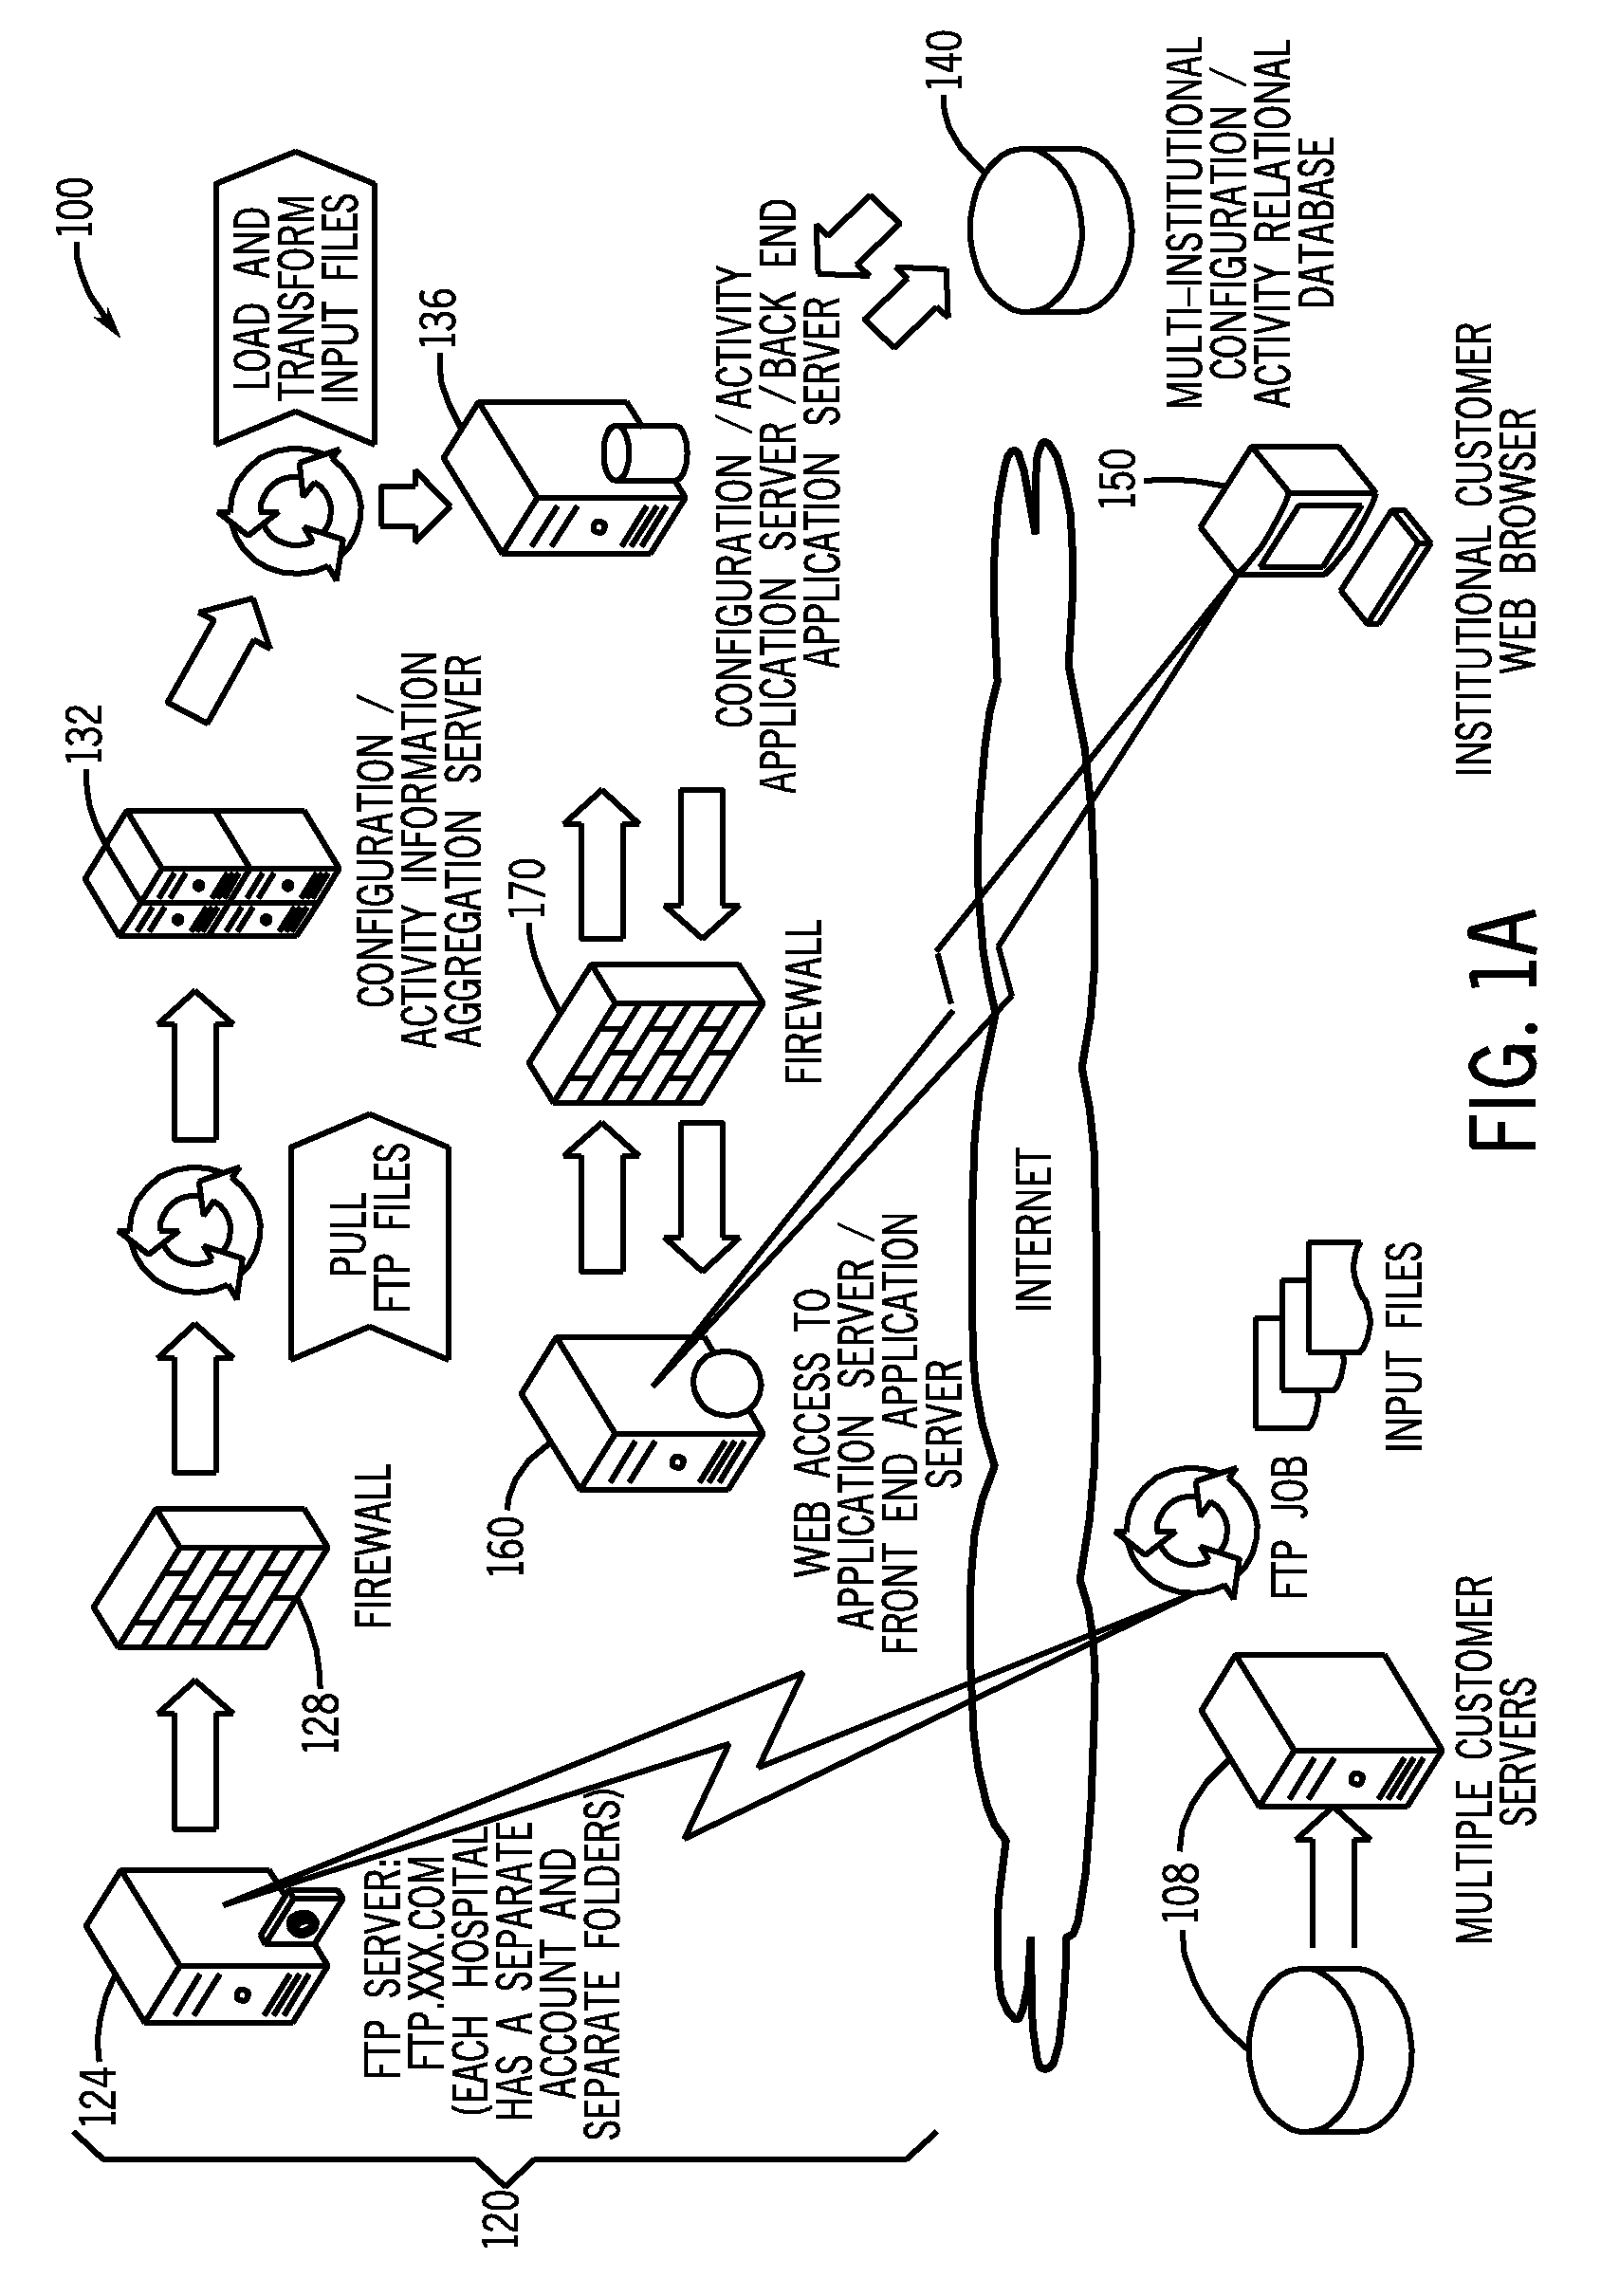 System and method for comparing and utilizing activity information and configuration information from multiple device management systems